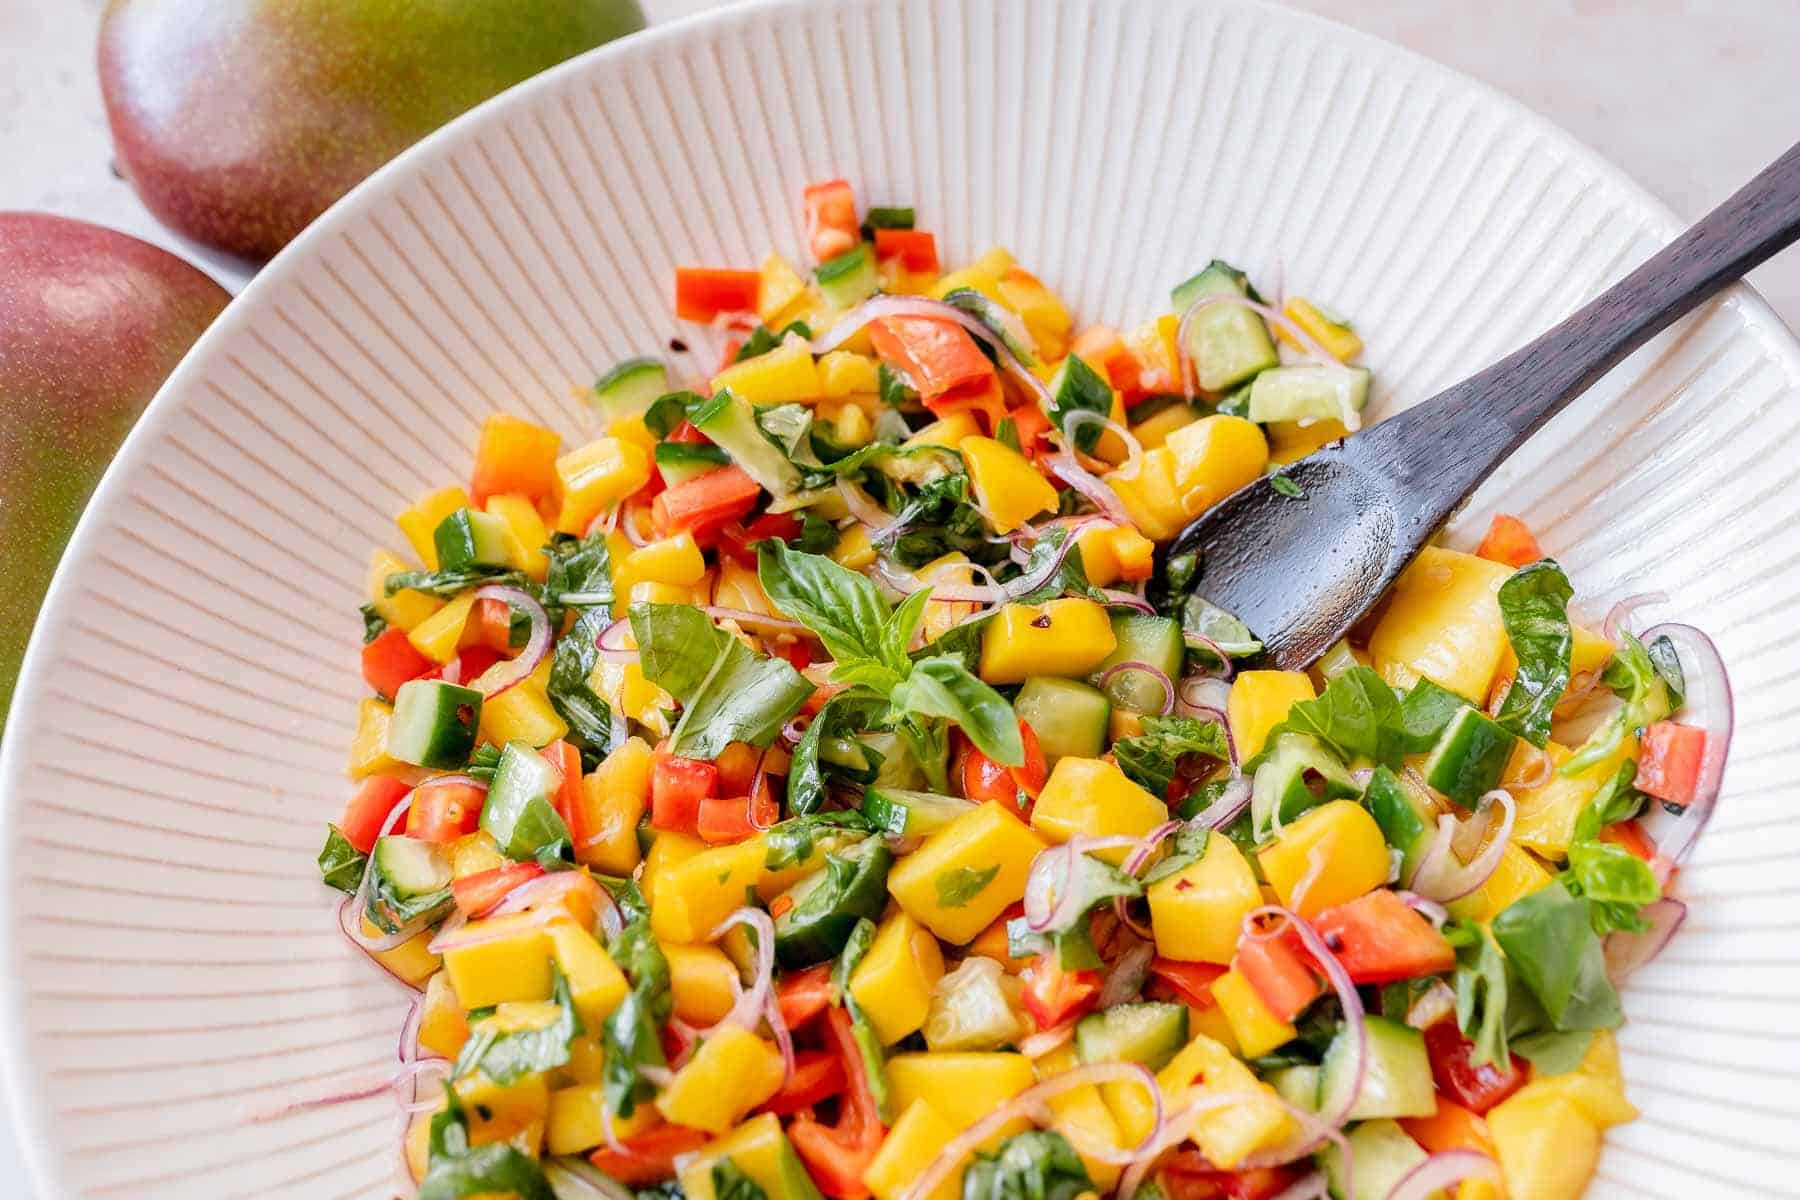 Mango salad with small wooden spoon on white plate.